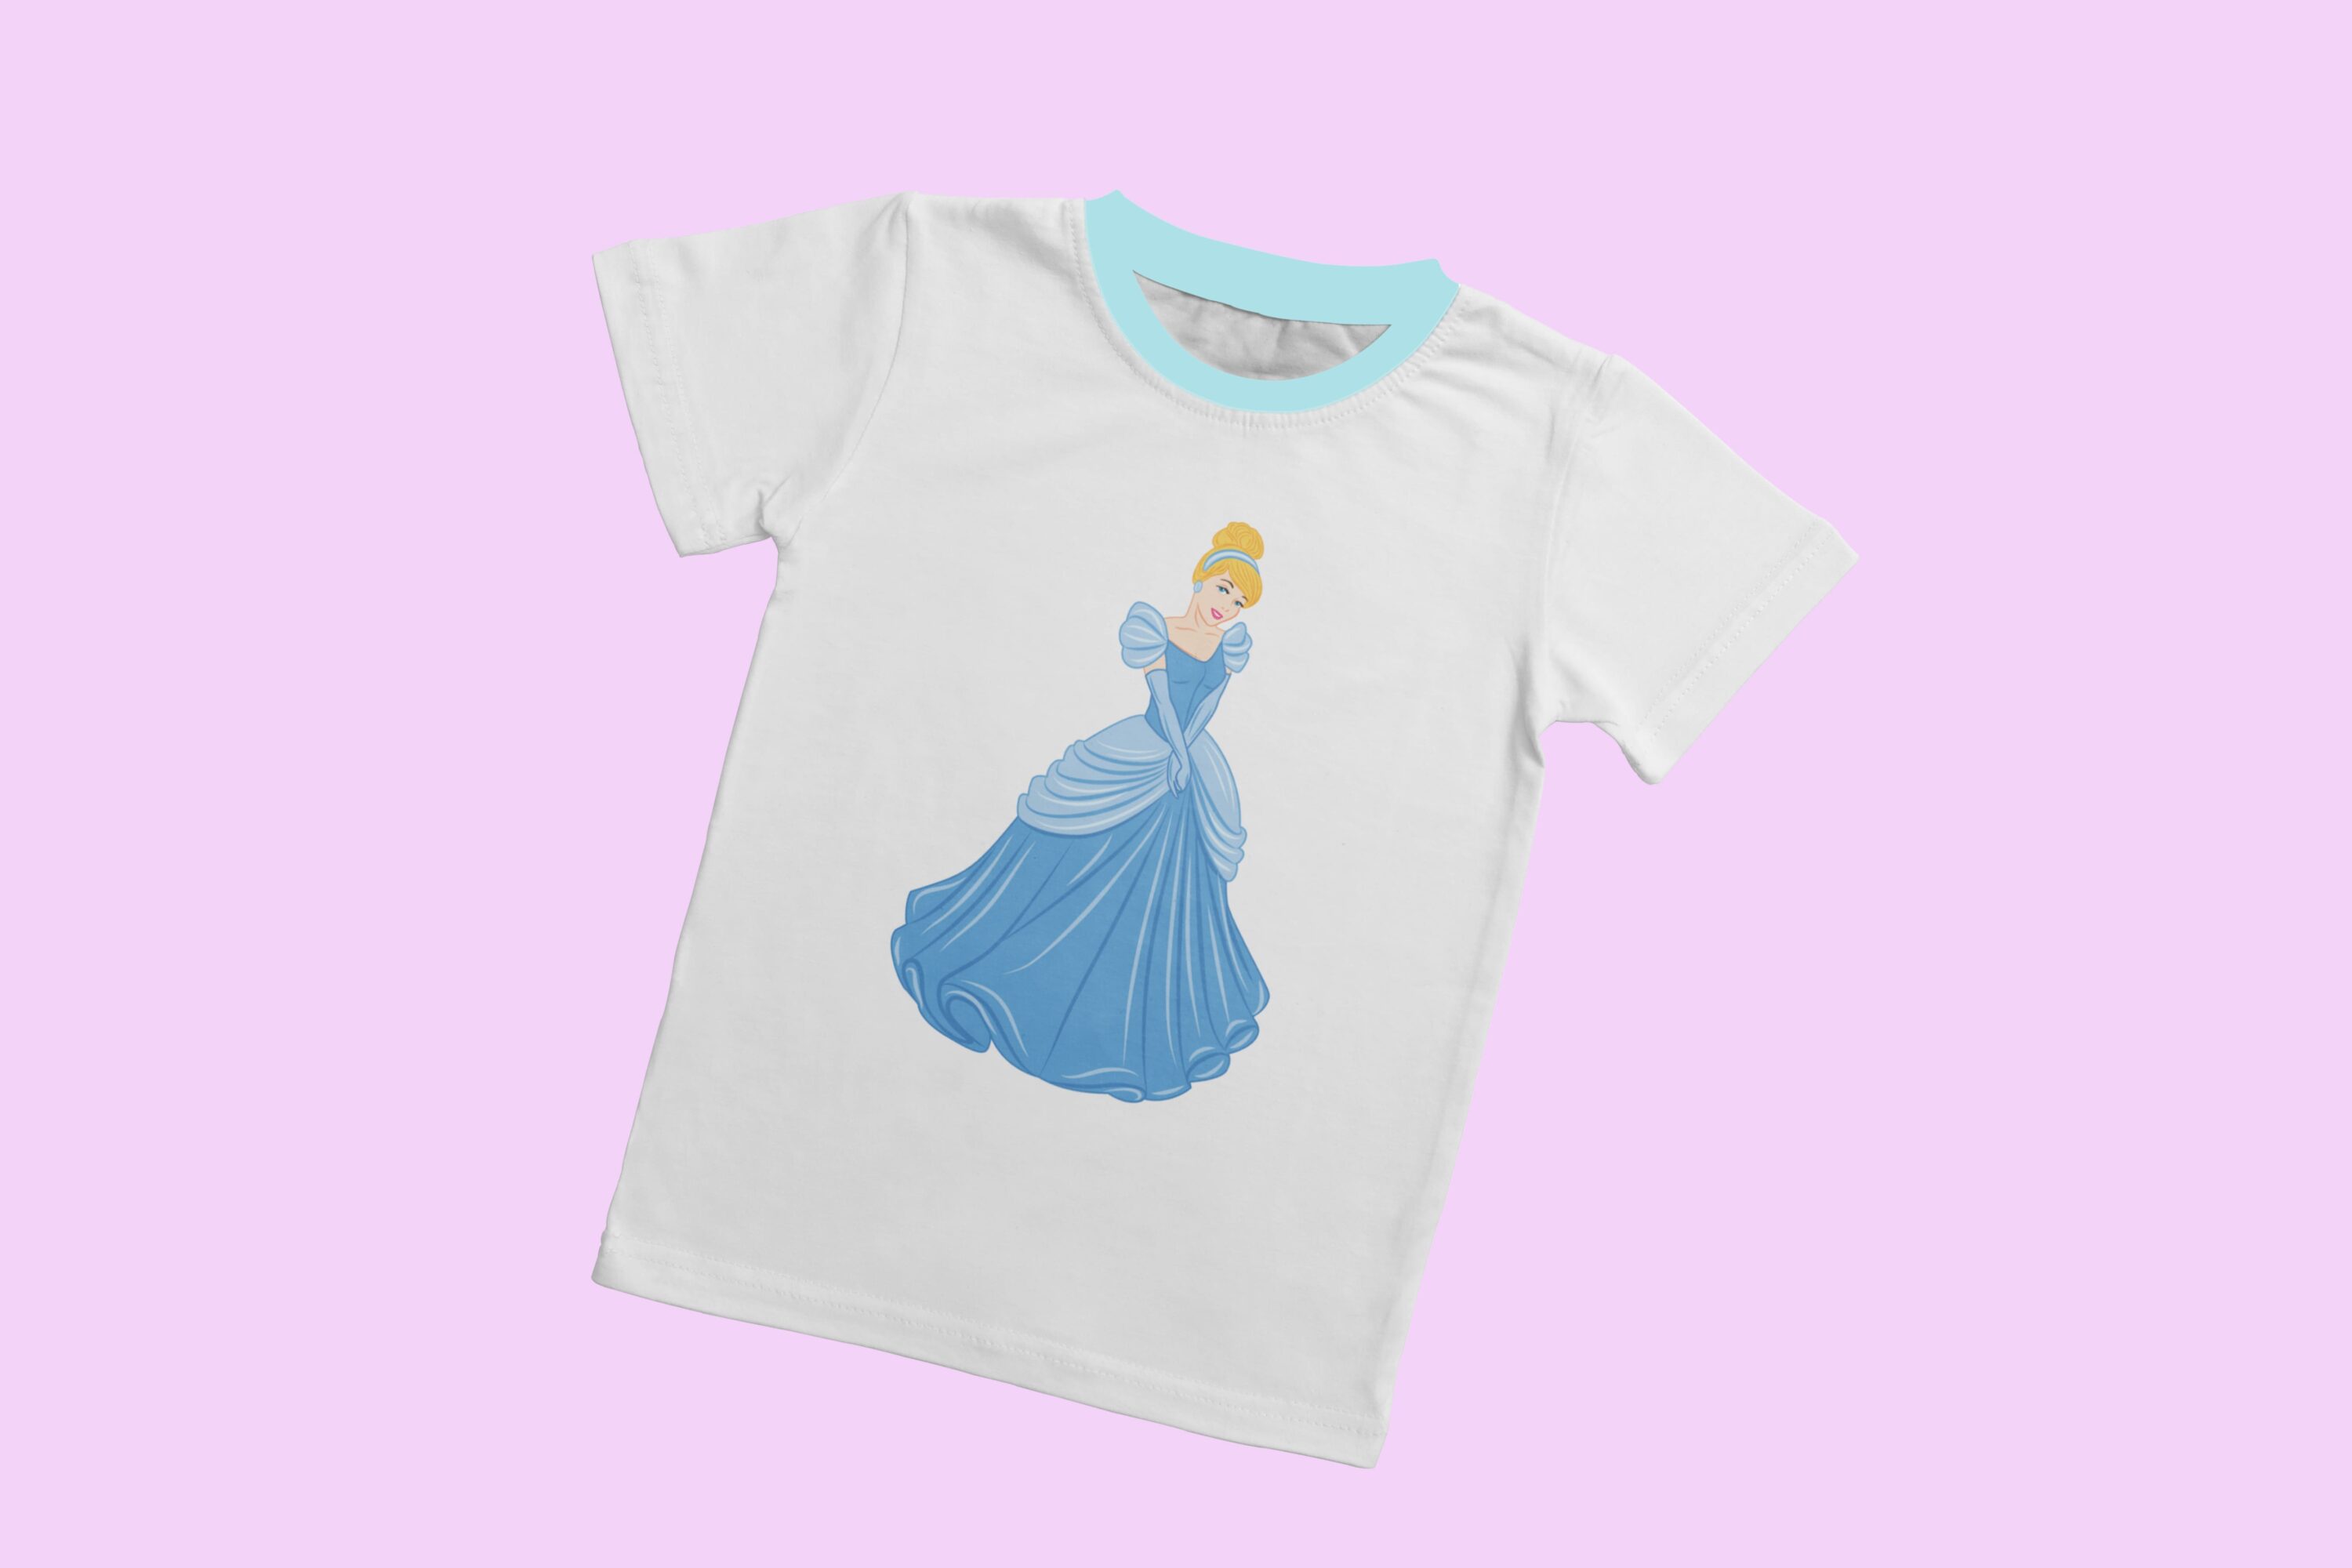 Image of white t-shirt with cute Cinderella print.